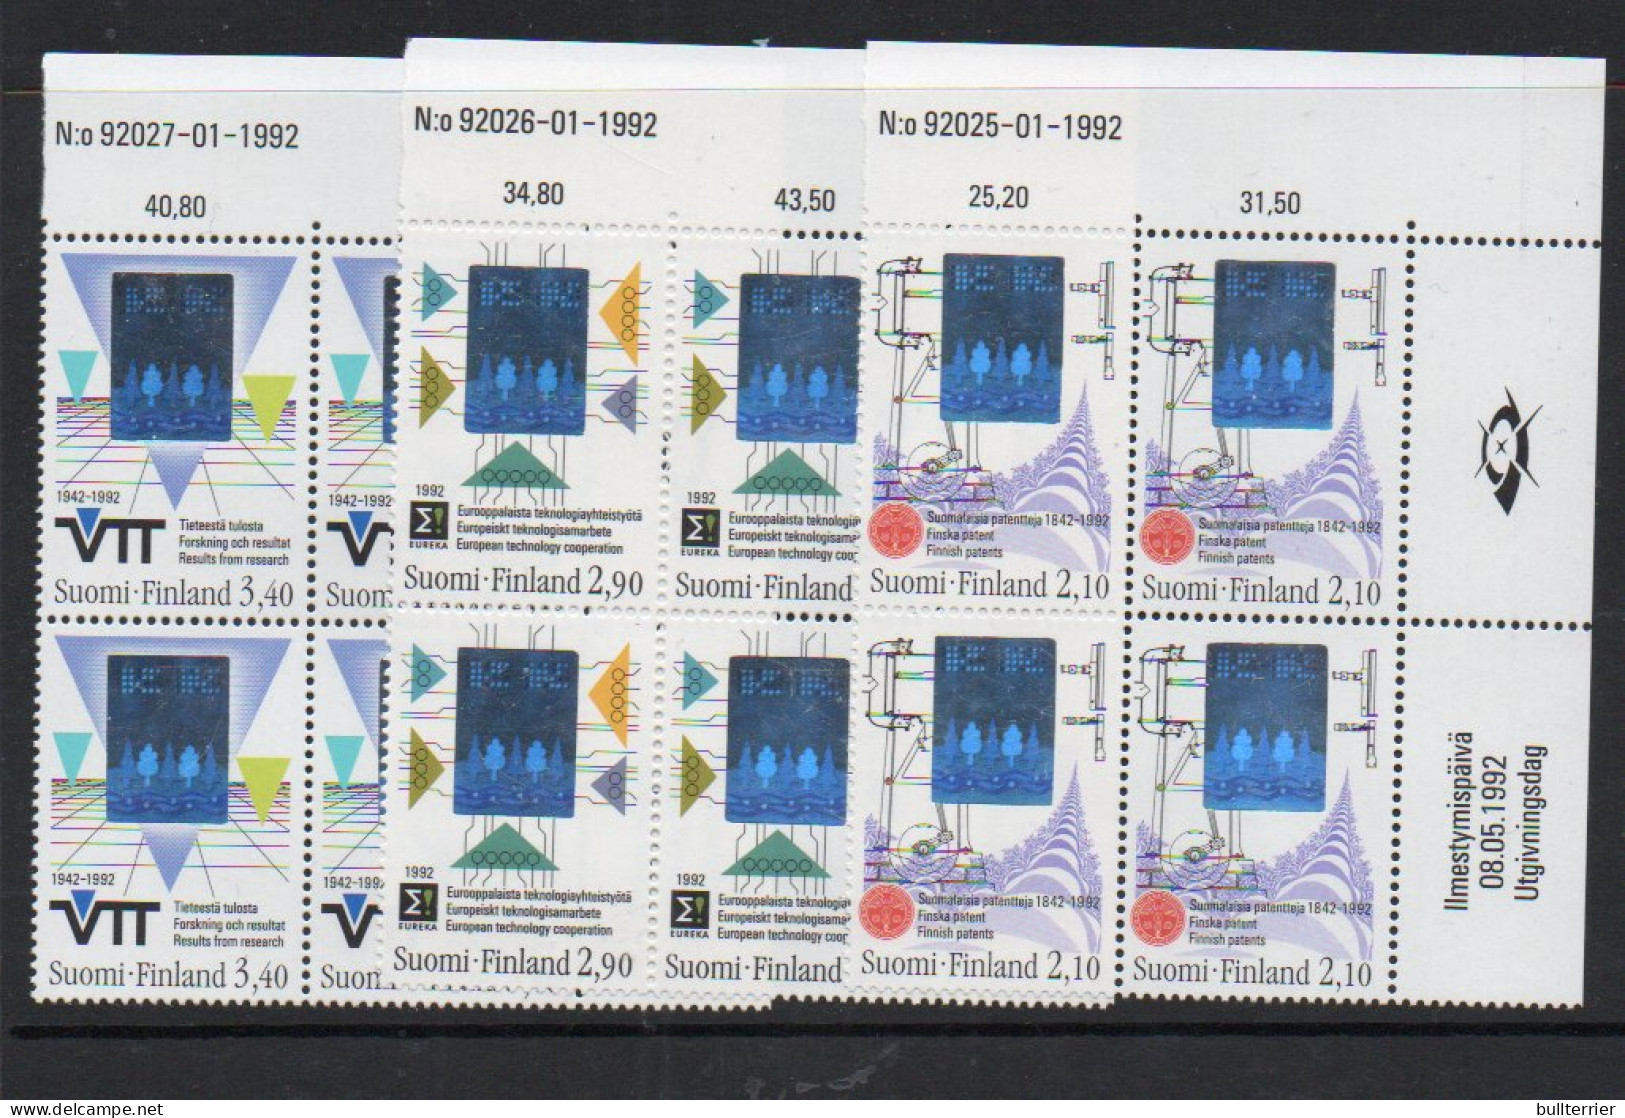 HOLOGRAMS - FINLAND - 1992 -TECHNOLOGY HOLOGRAMS SET OF 3 IN BLOCKS OF 4 MINT NEVER HINGED, SG CAT £35 - Holograms